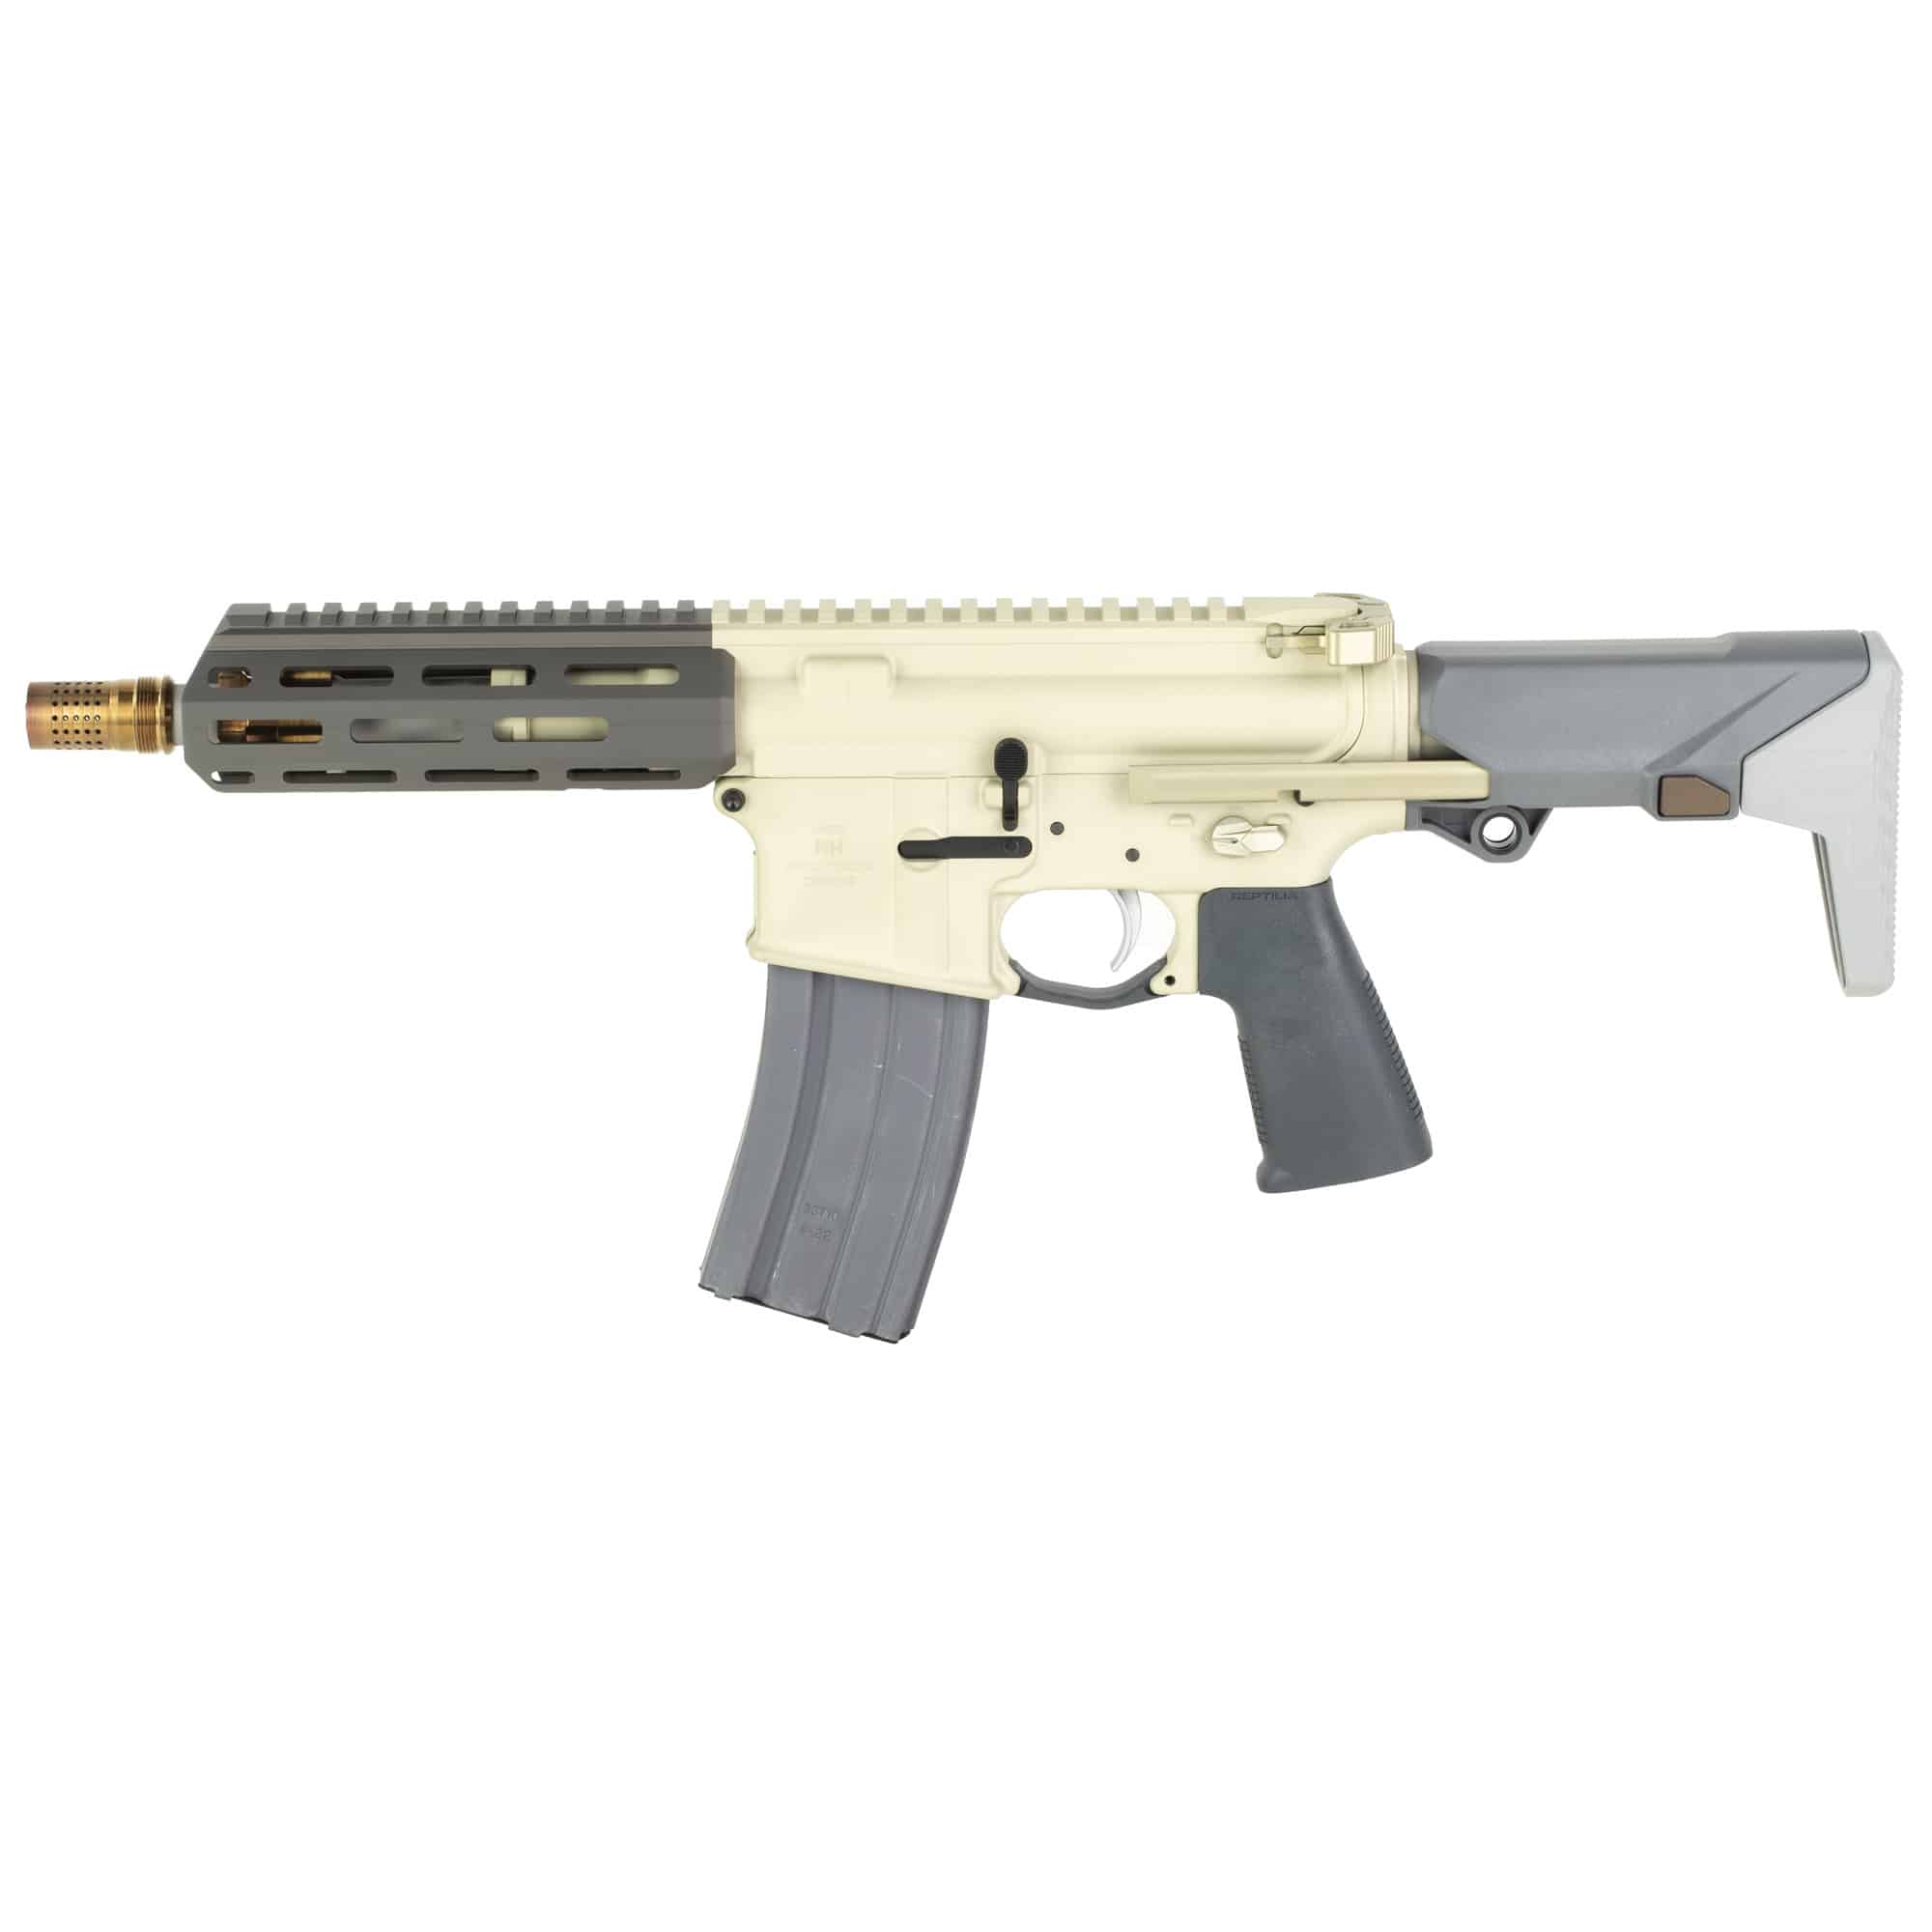 https://cityarsenal.com/product/q-300-blk-7-in-15-twist-sbr-with-shorty-stock-gray-accents-sw-300blk-7in-shorty/